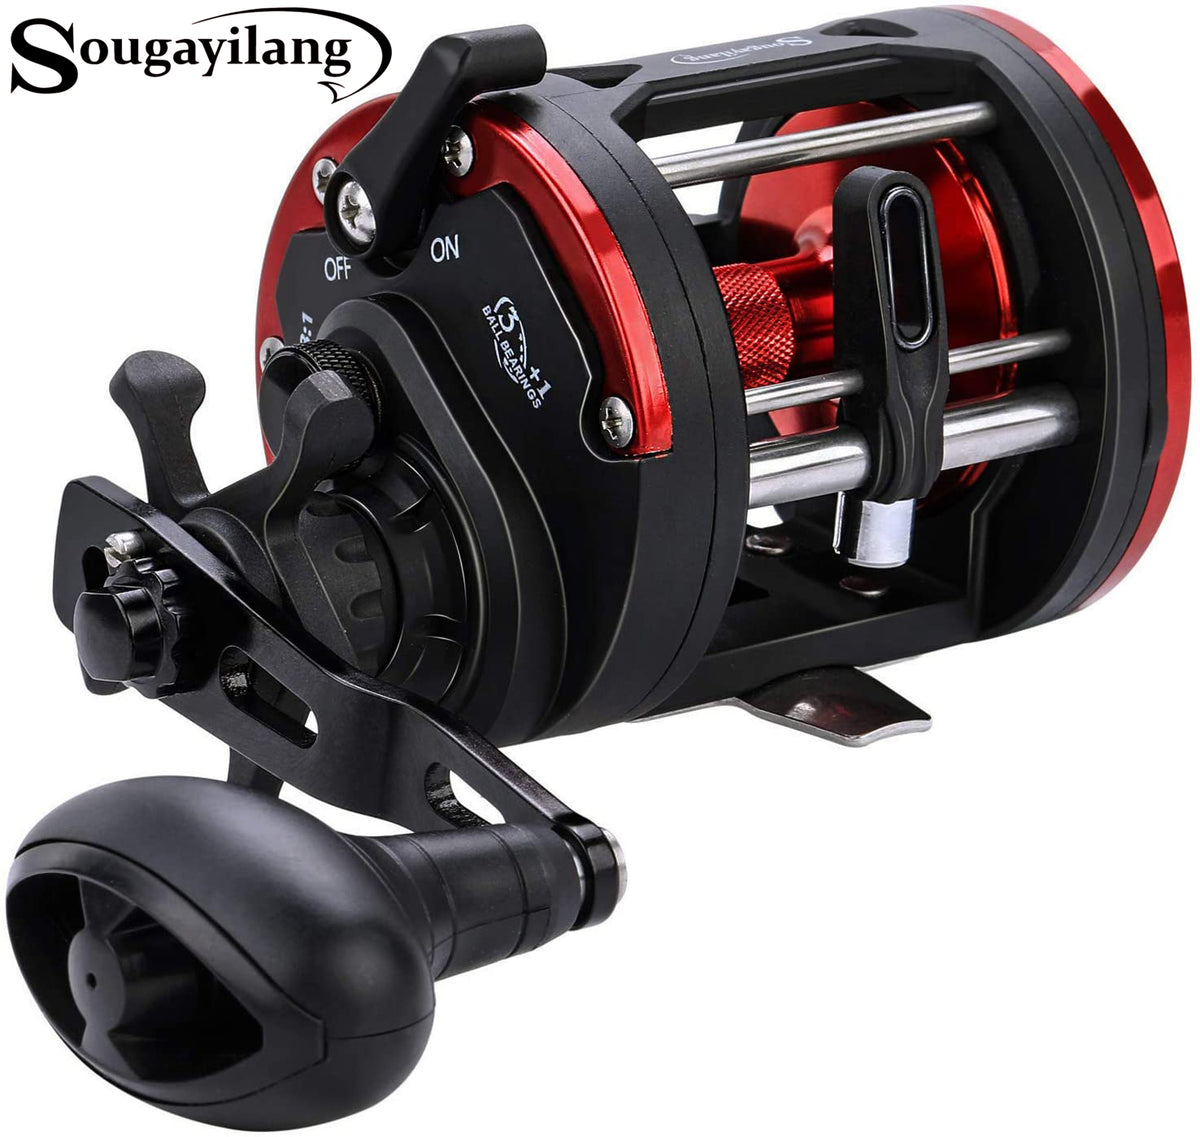 Sougayilang Trolling Reel Level Wind Conventional Reel Graphite Body  Fishing Reel, Durable Stainless-Steel, Large Line Capacity